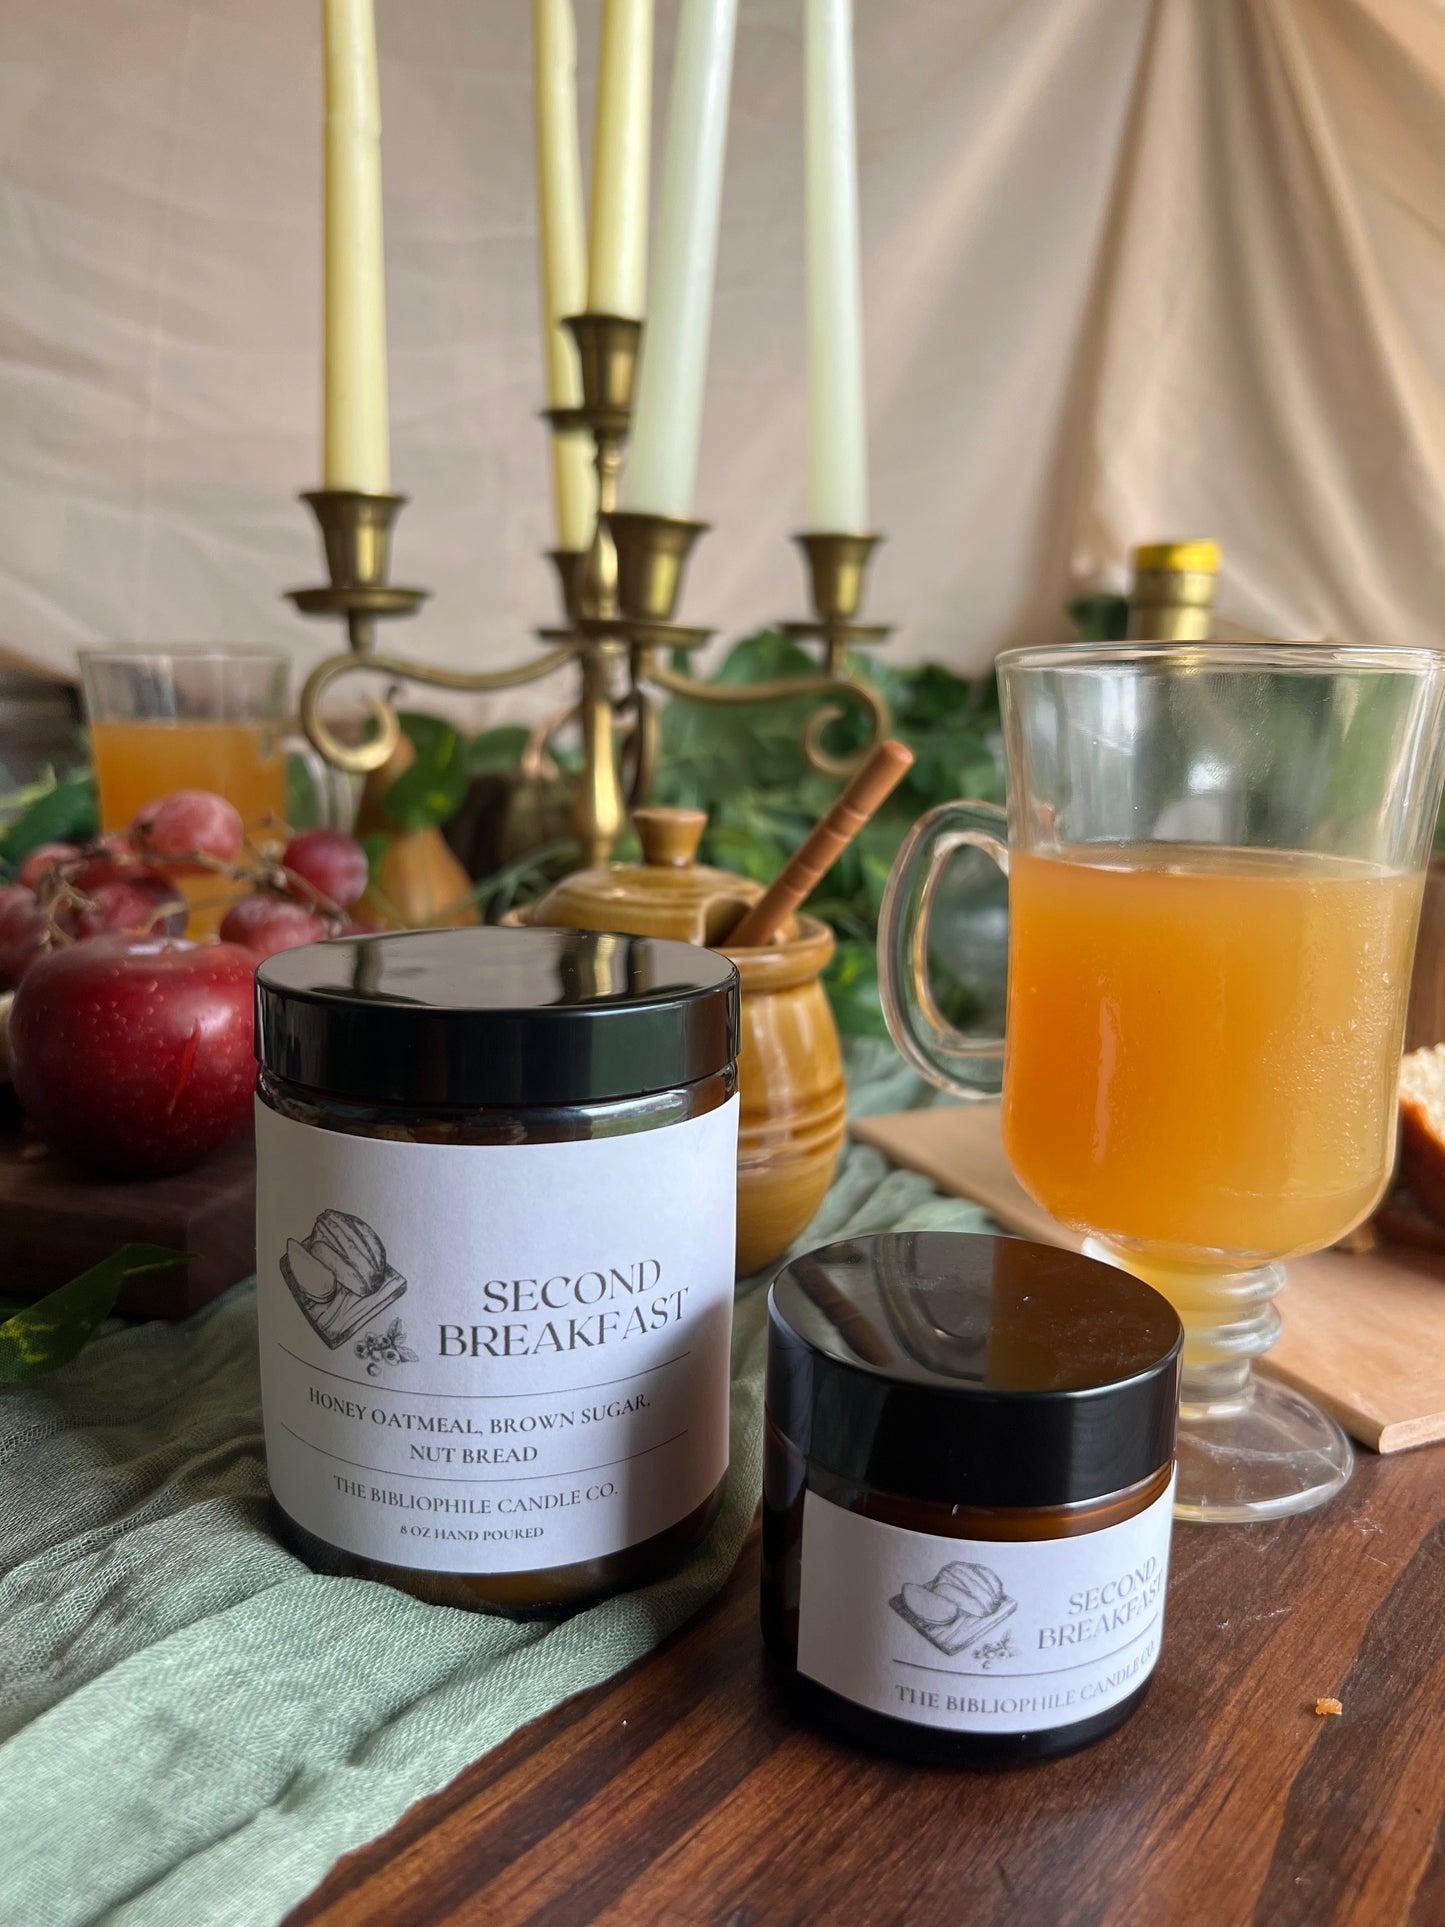 Second Breakfast Scented Candle